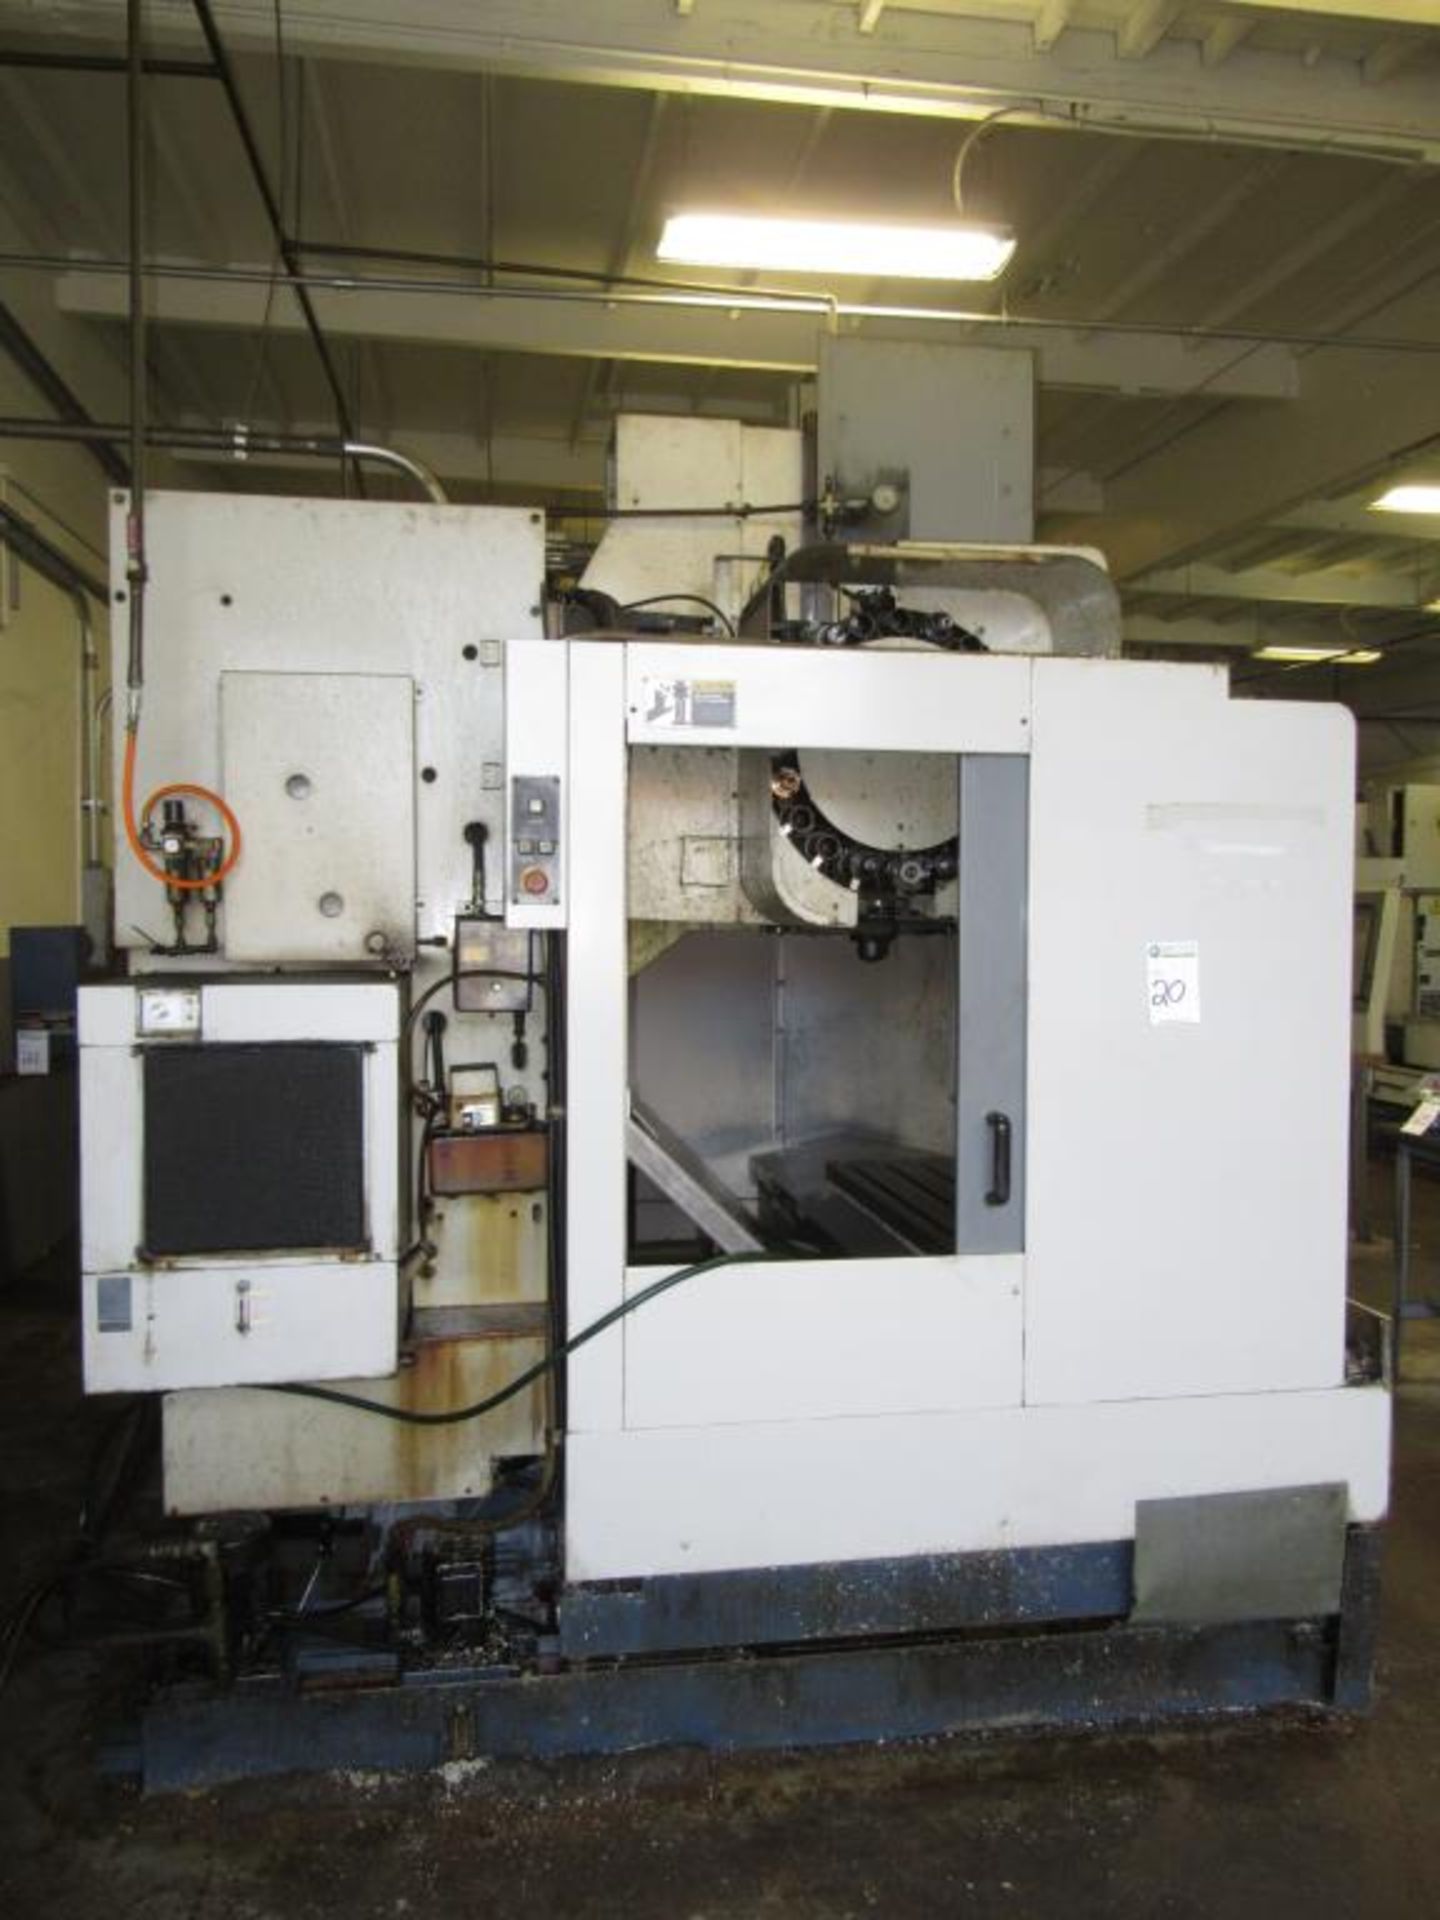 Mori Seiki SV-50 / 40 1996 - CNC Vertical Machining Center with MSC-518 3-Axis Control Panel, - Image 6 of 8